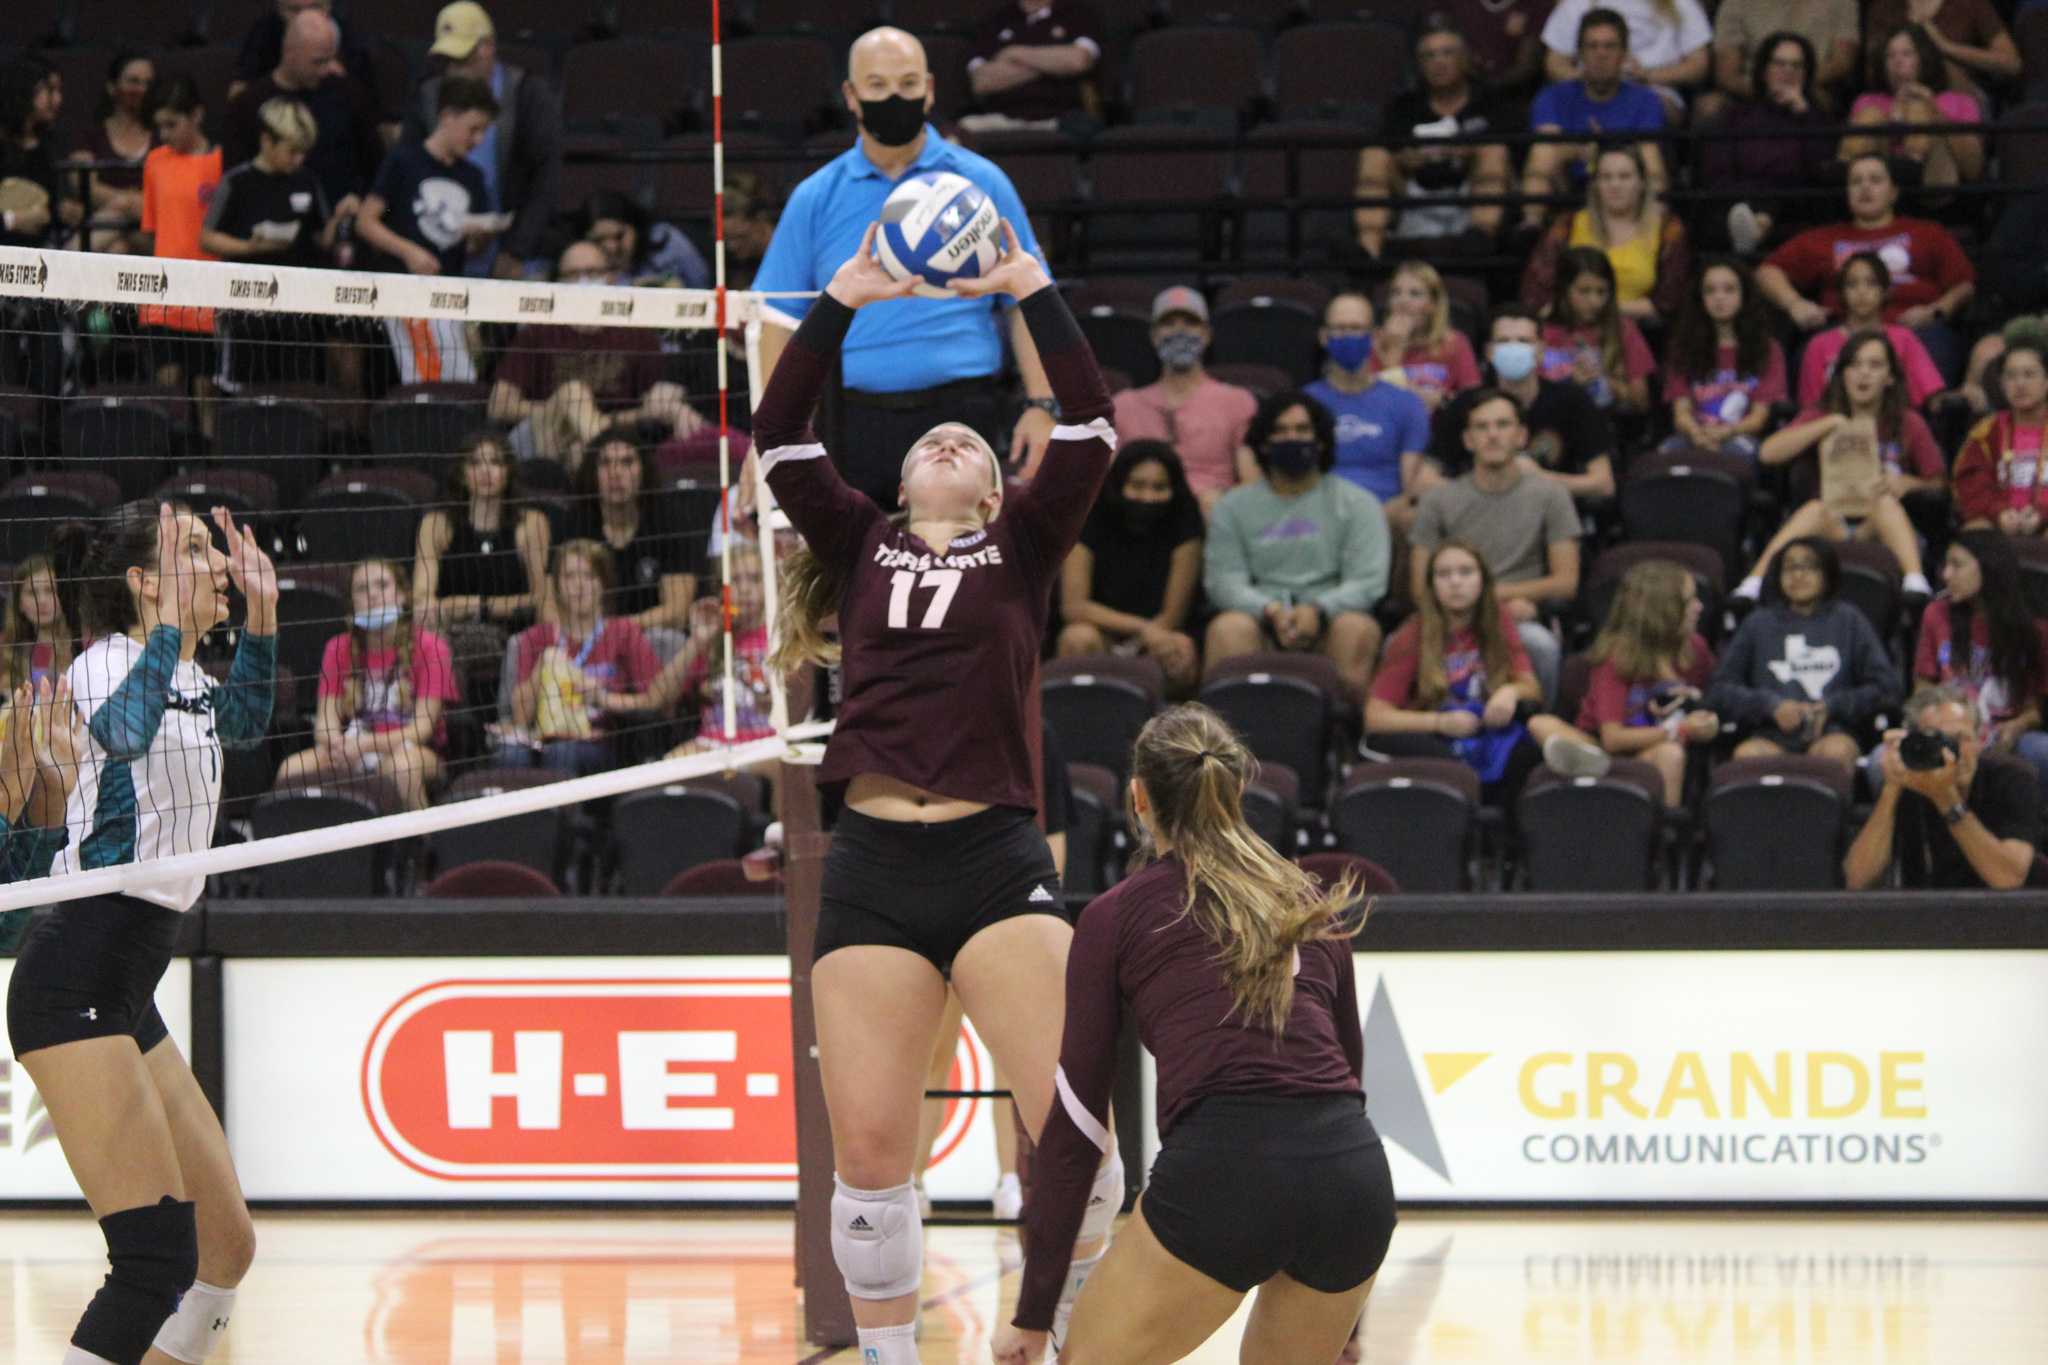 Volleyball+seniors+reflect+on+season%2C+lend+advice+to+incoming+recruits